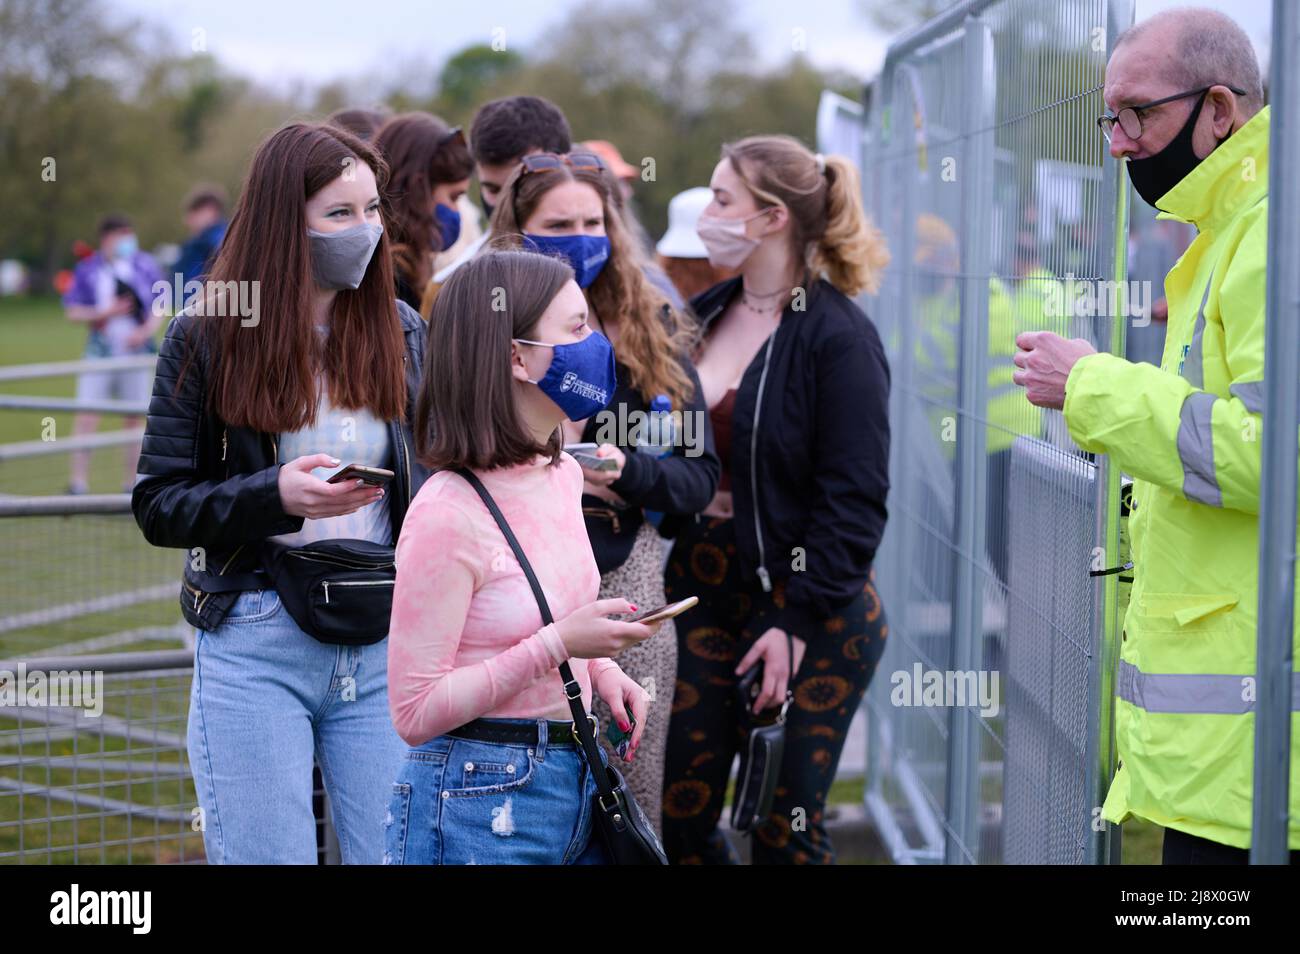 Music fans arrive for the first non-socially distanced gig at Sefton Park in Liverpool on May 2, 2021. The gig is headlined by Manchester indie band Blossoms. The gig was a test pilot event by the Government for the return of live music events this Summer. Featuring: Atmosphere Where: Liverpool, United Kingdom When: 02 May 2021 Credit: Graham Finney/WENN Stock Photo